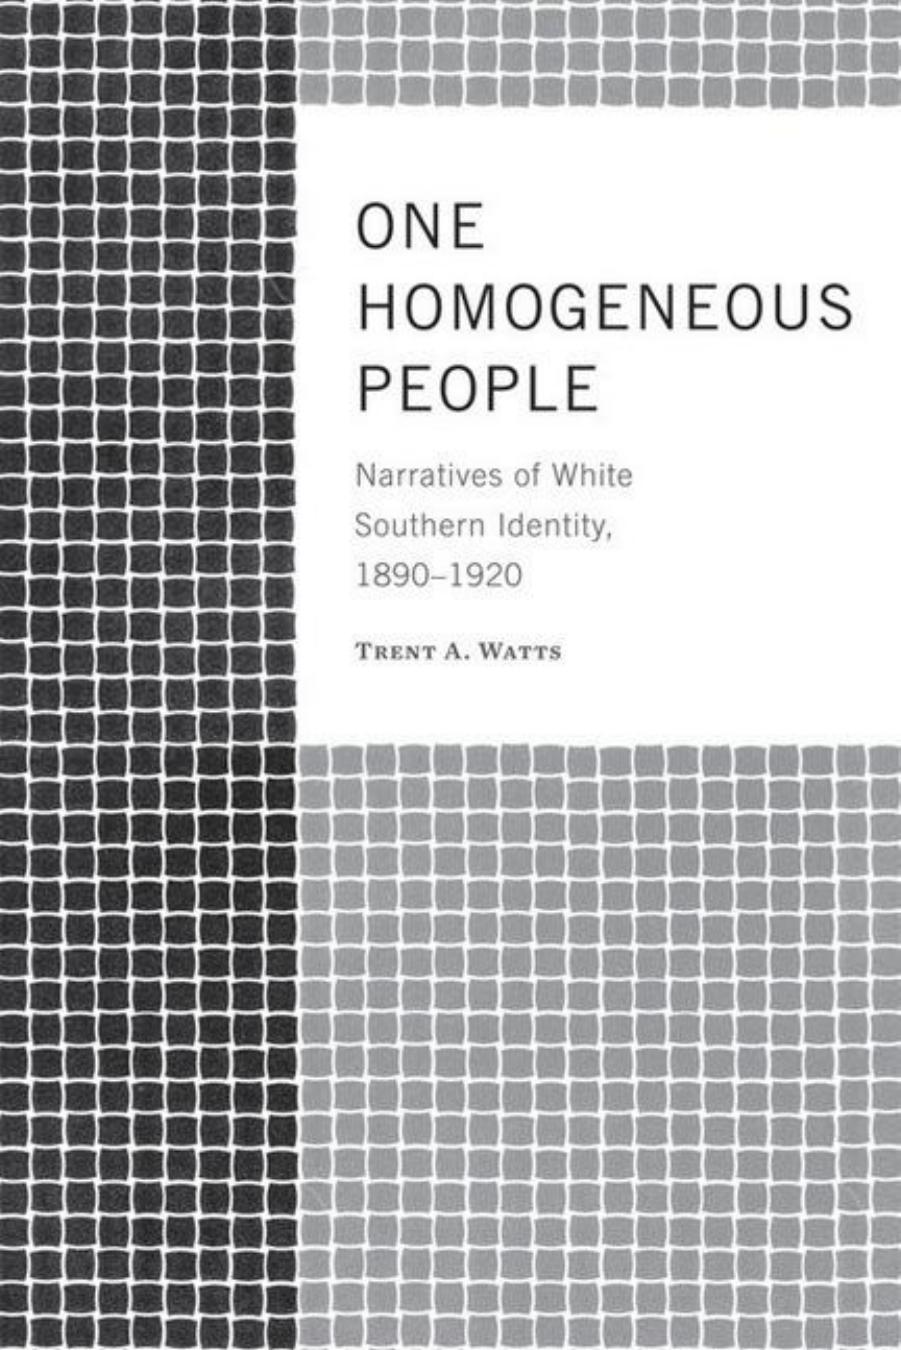 One Homogeneous People : Narratives of White Southern Identity, 1890-1920 by Trent A. Watts